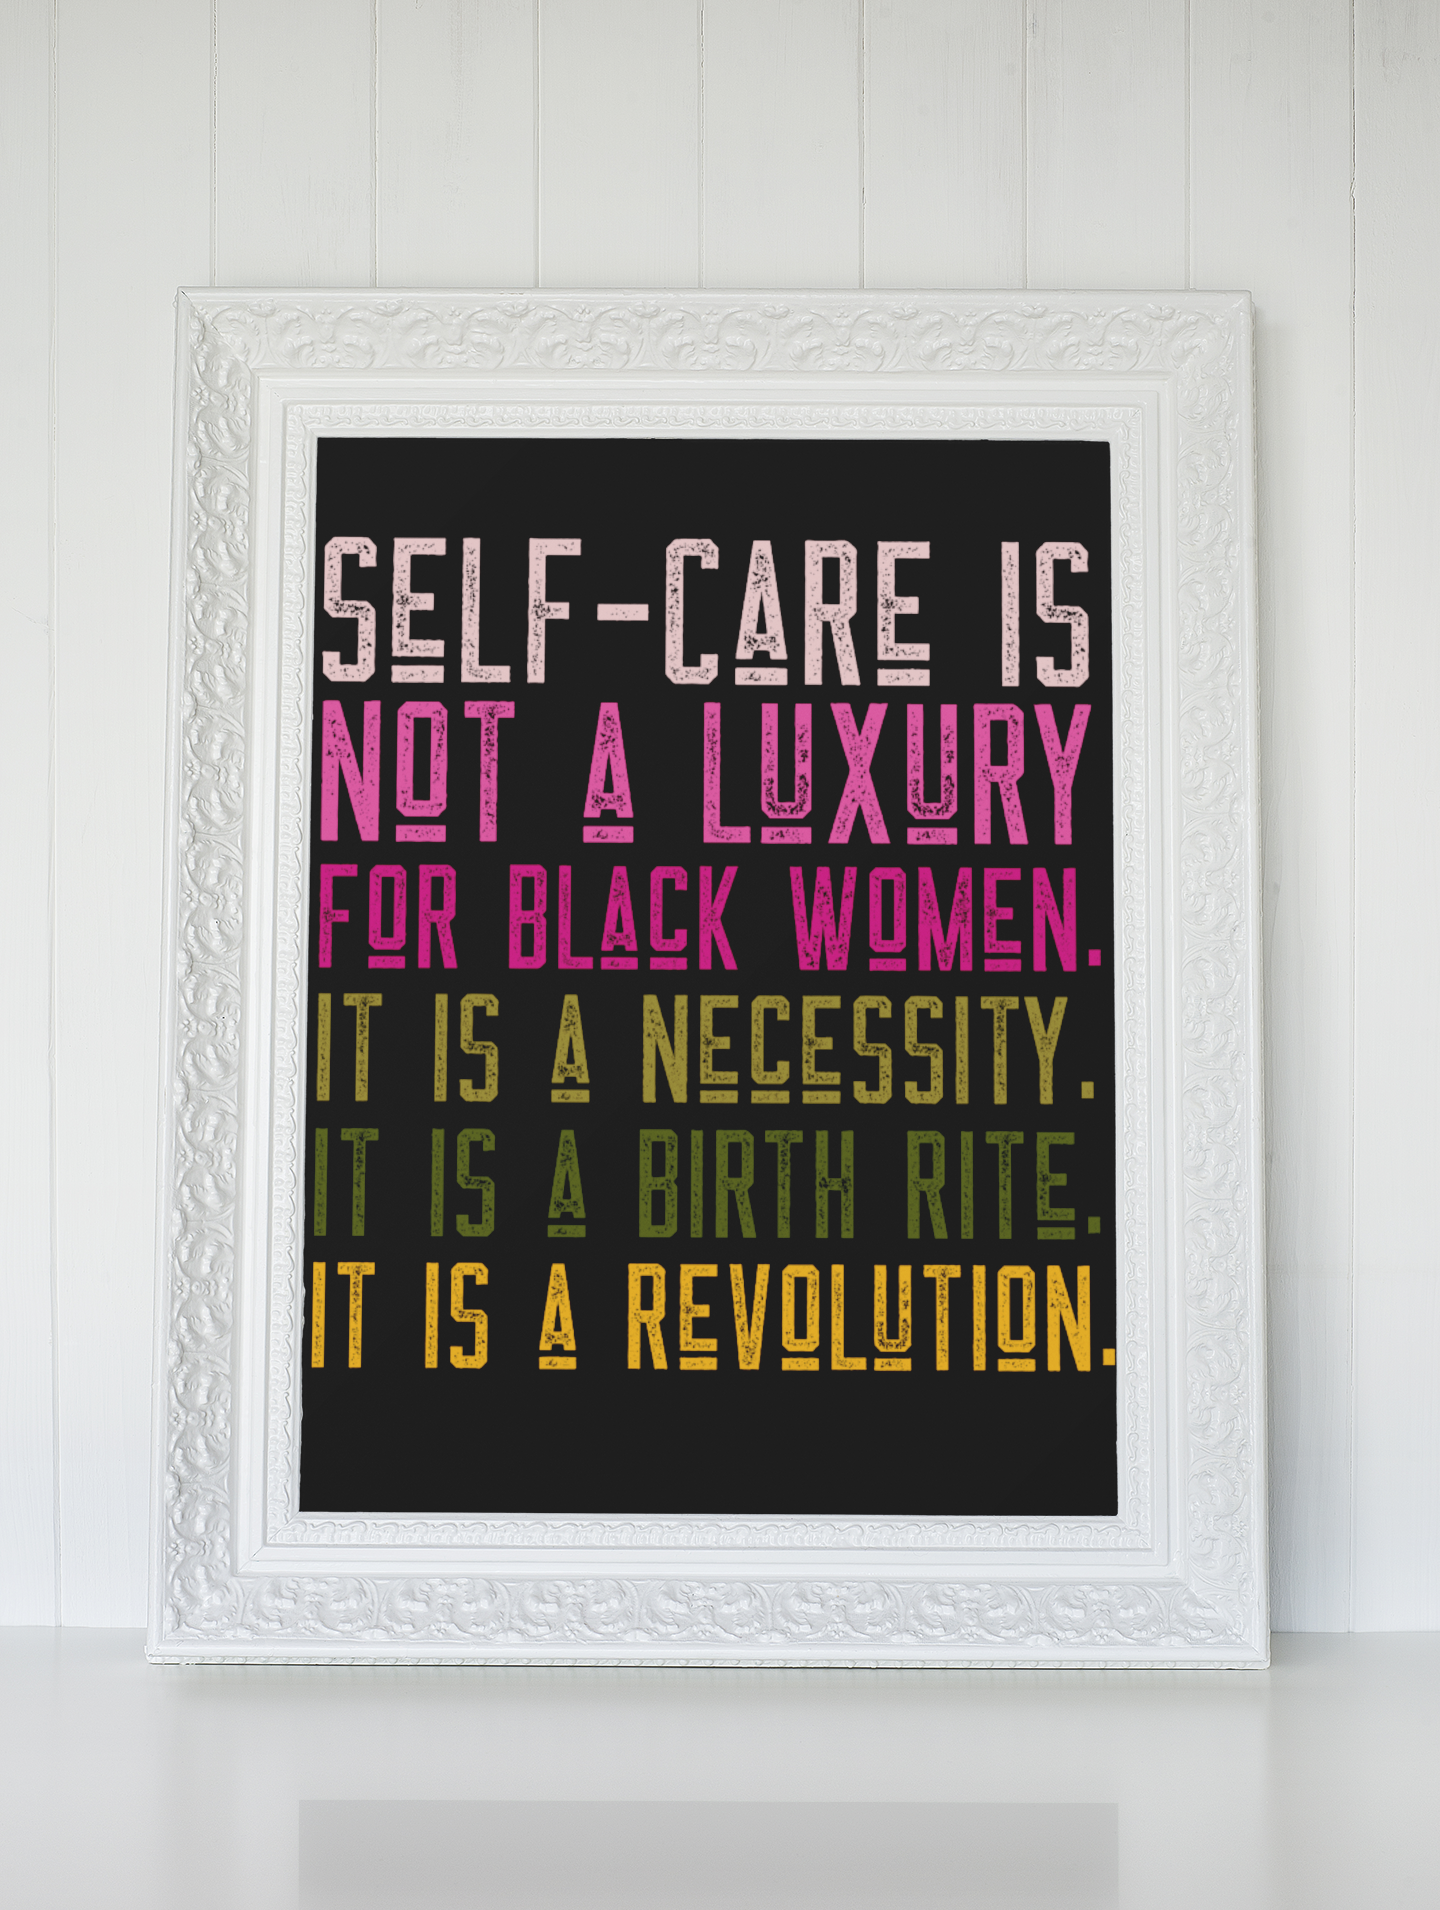 The Self Care posters